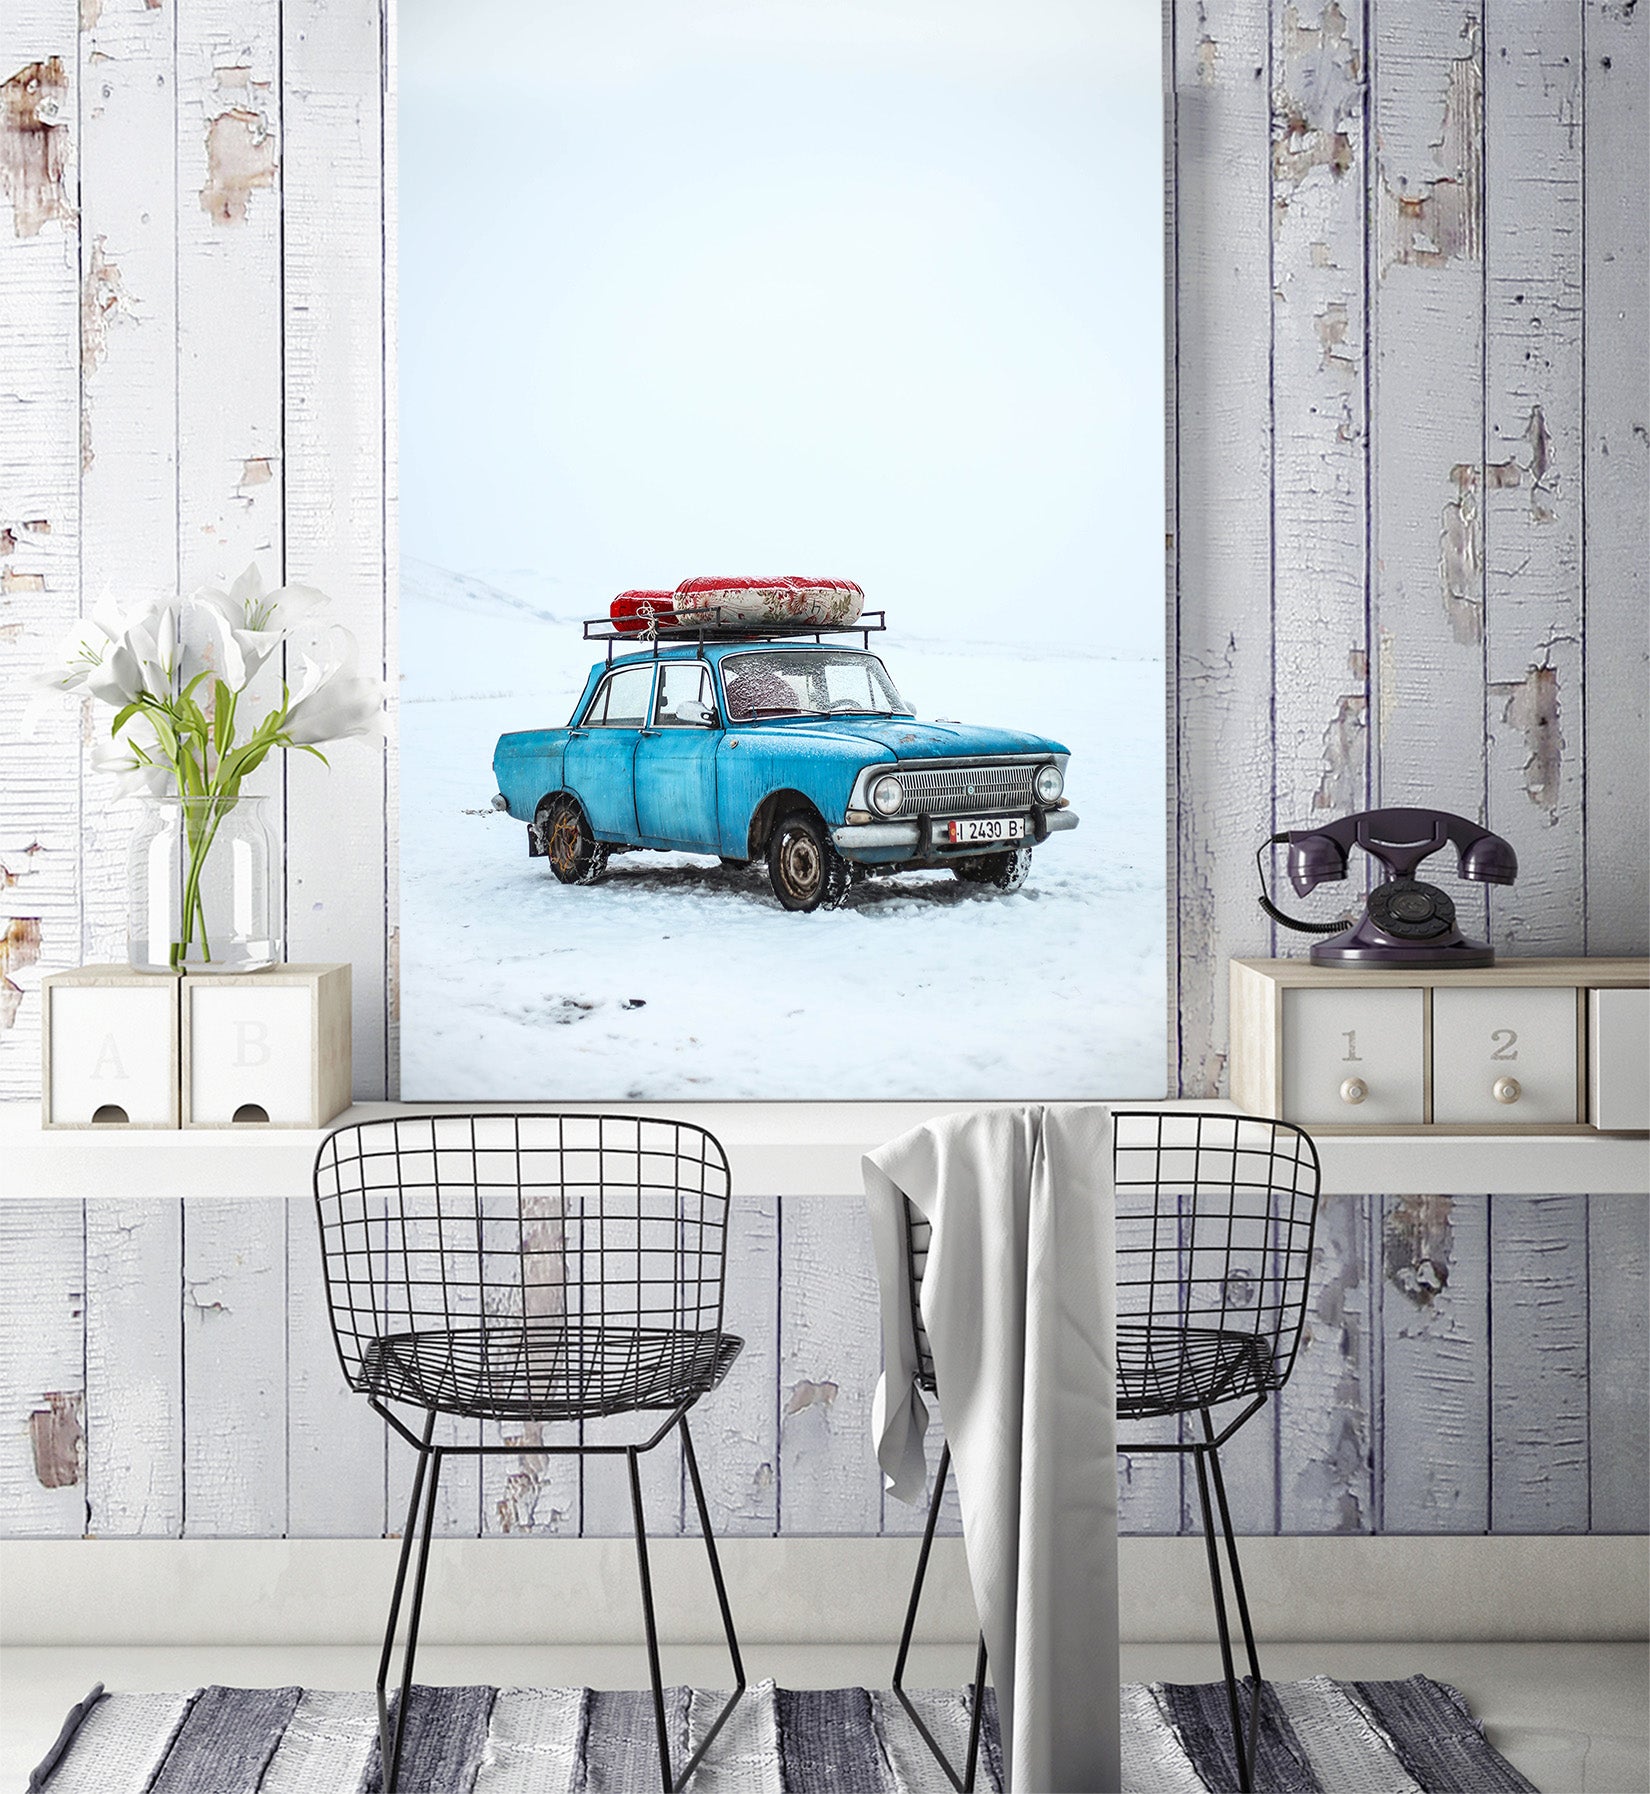 3D Auto Automobile 427 Vehicle Wall Murals